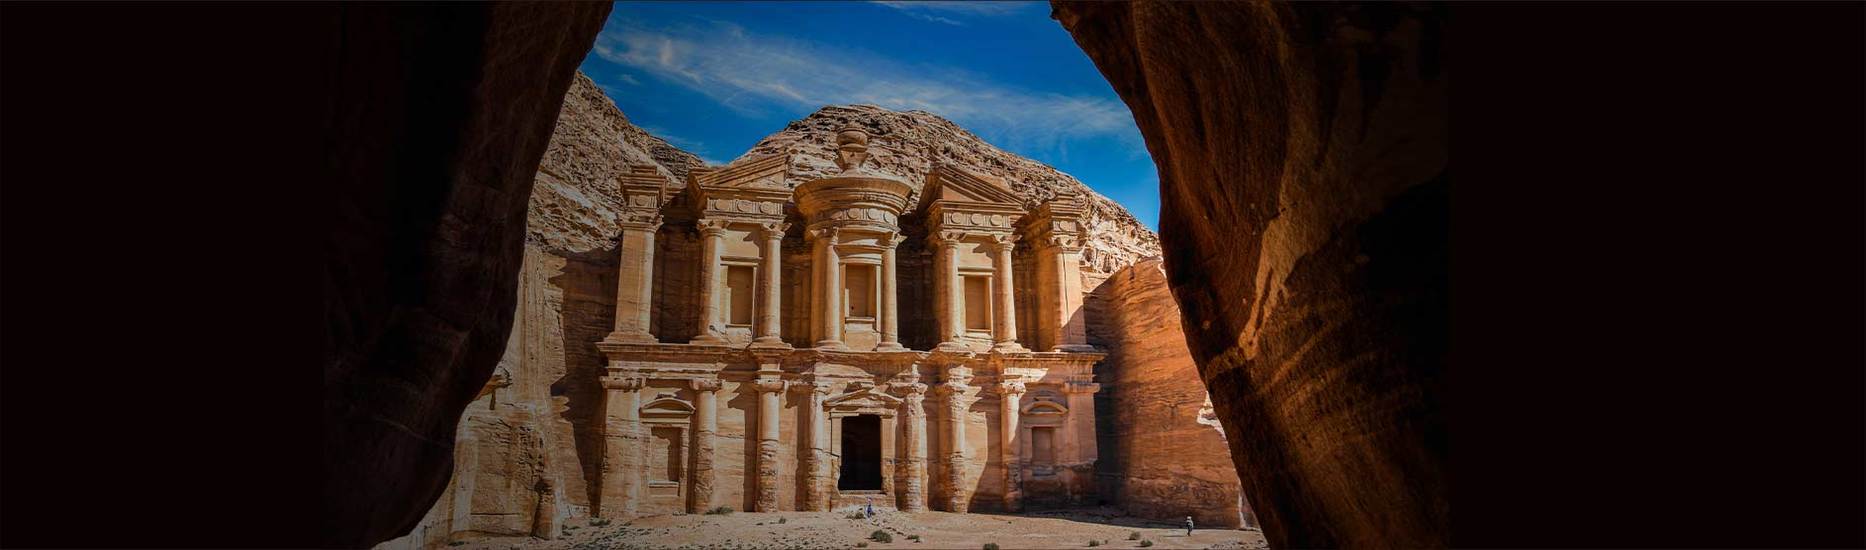 Petra and Wadi Rum 2 Day Tour from Tel Aviv $280